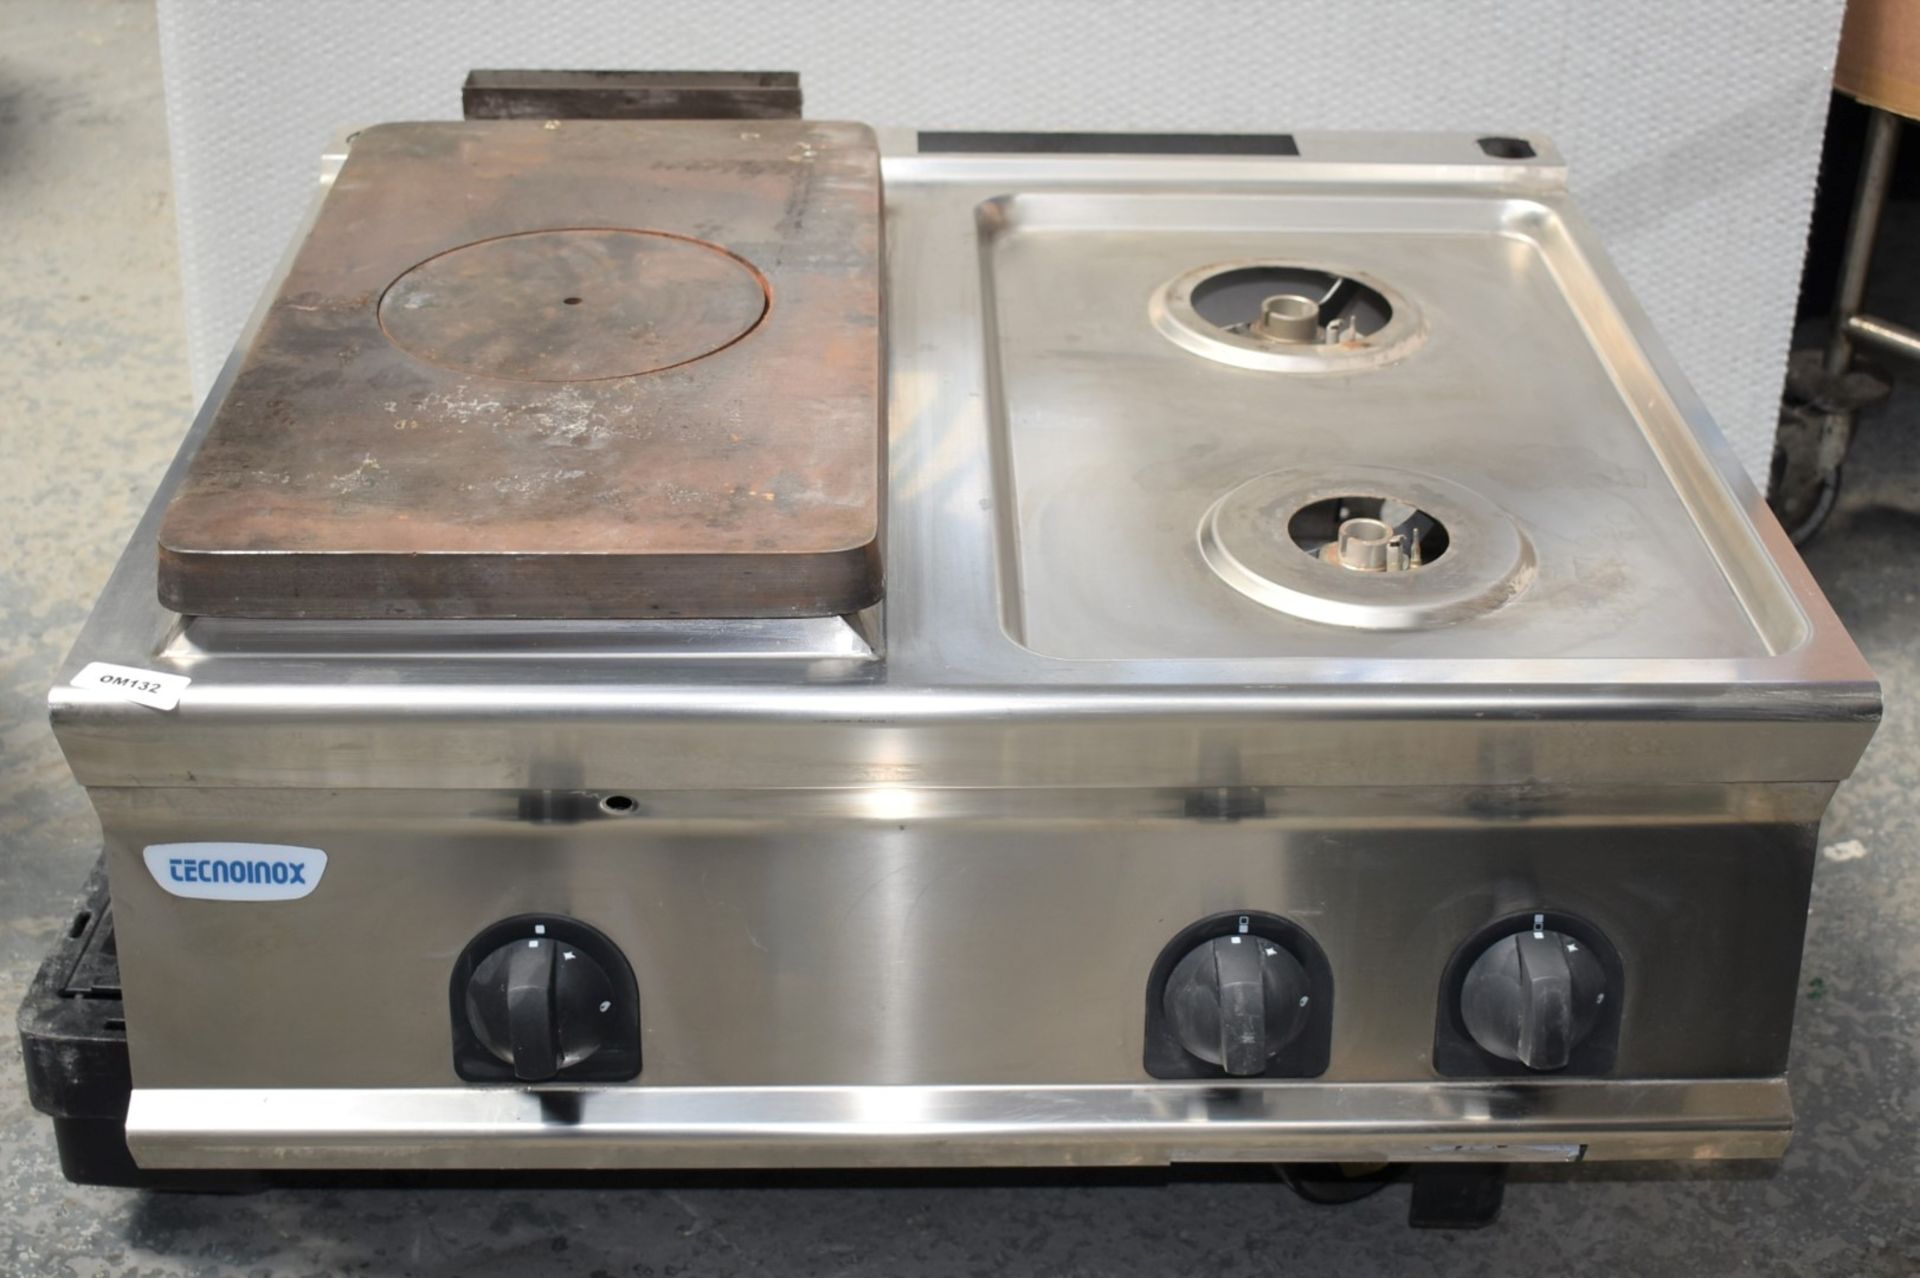 1 x Tecnoinox Cooking Station With Griddle and Two Burner Hob - Model PPC8G7 - RRP £2,225 - Image 10 of 10